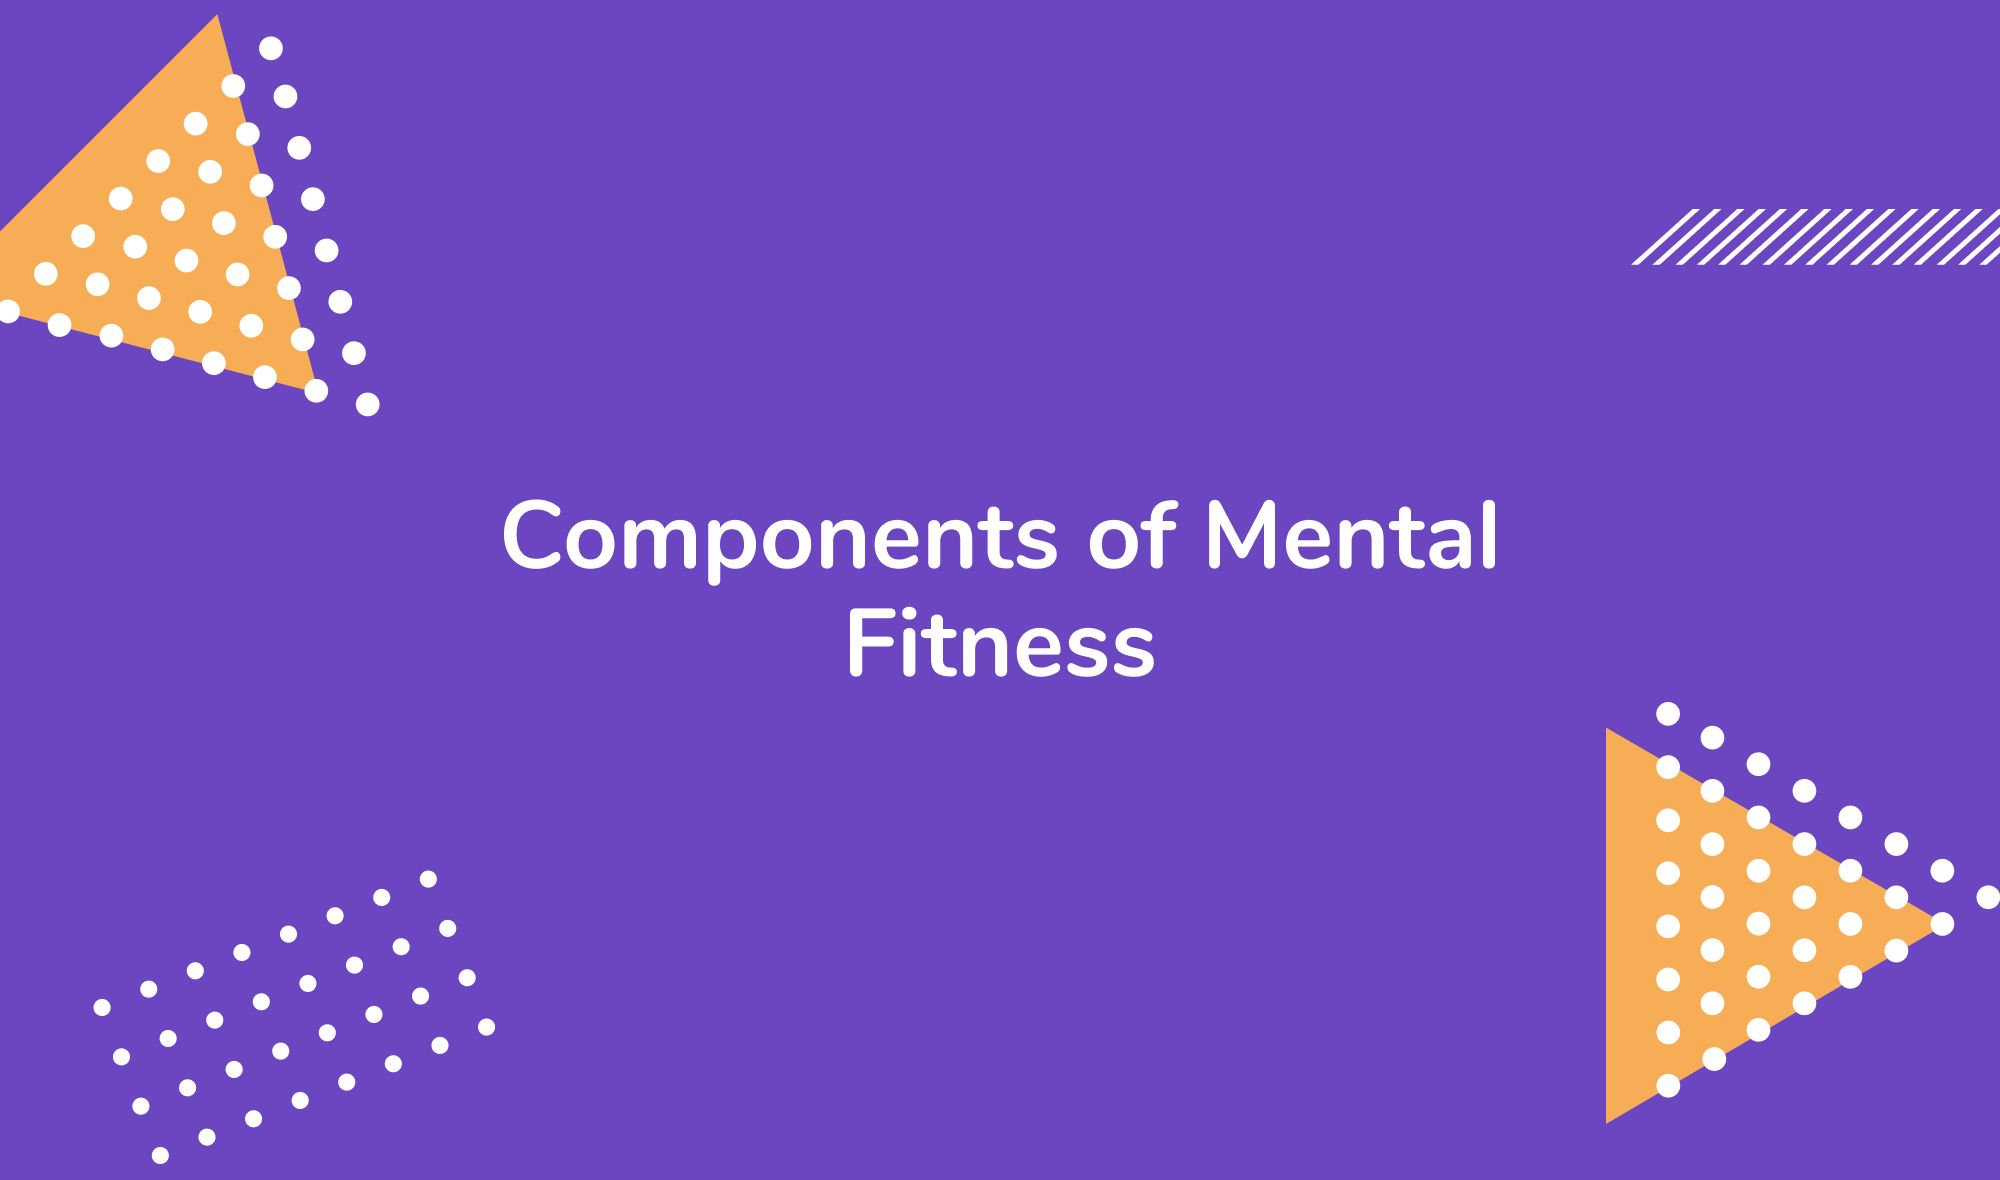 Components of Mental Fitness